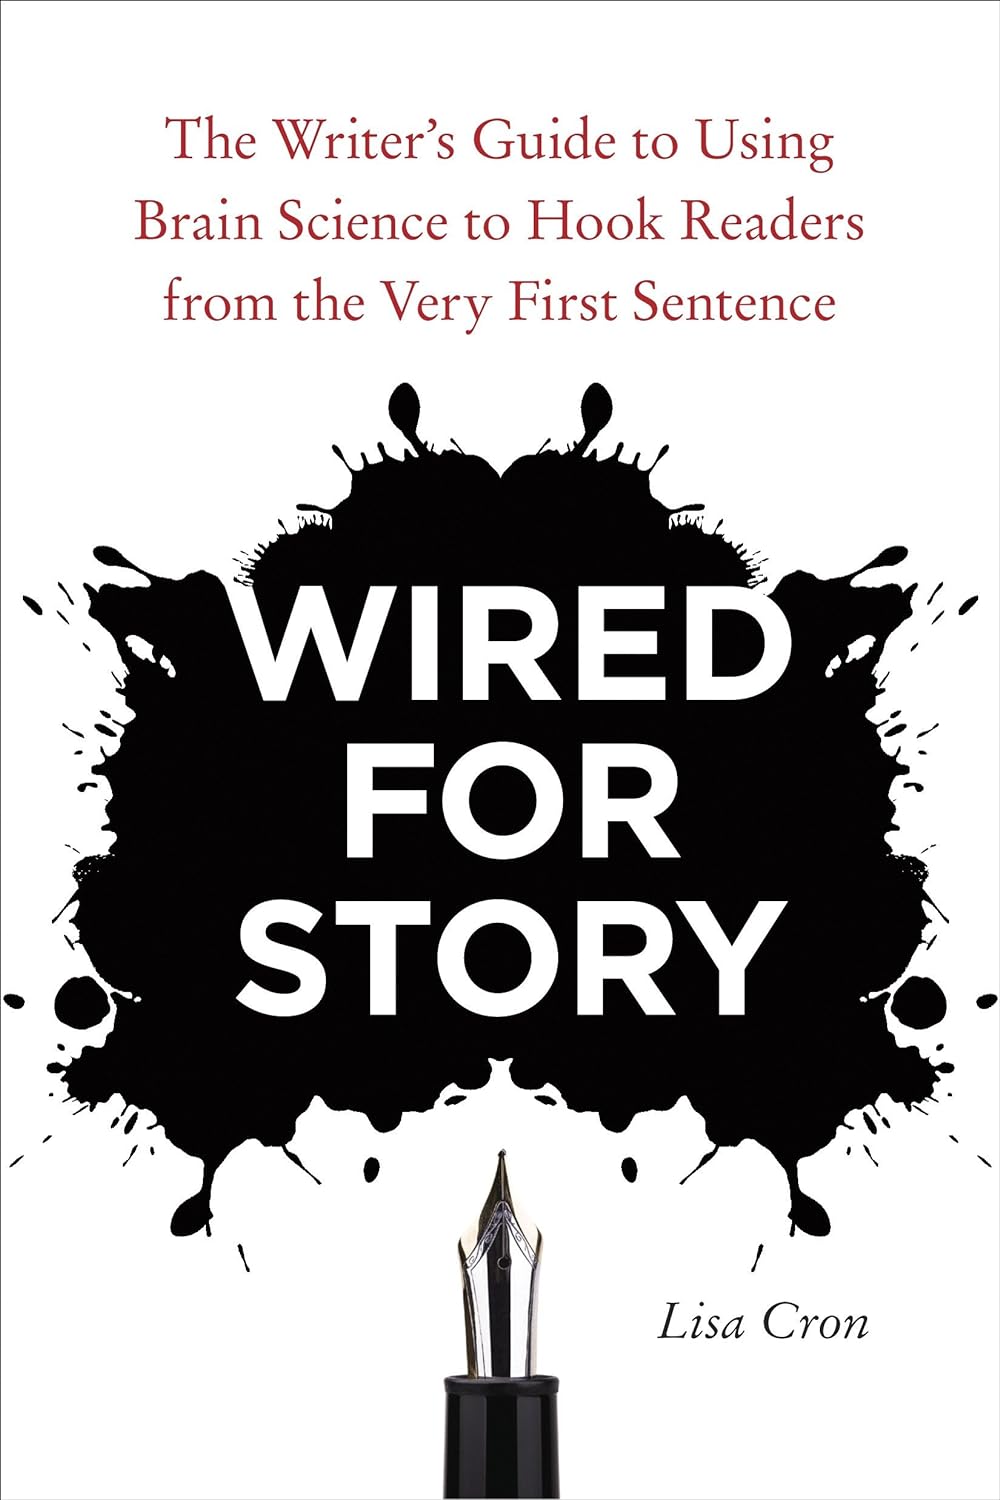 This image is the cover of Wired for Story: The Writer’s Guide to Using Brain Science to Hook Readers from the Very First Sentence by Lisa Cron.